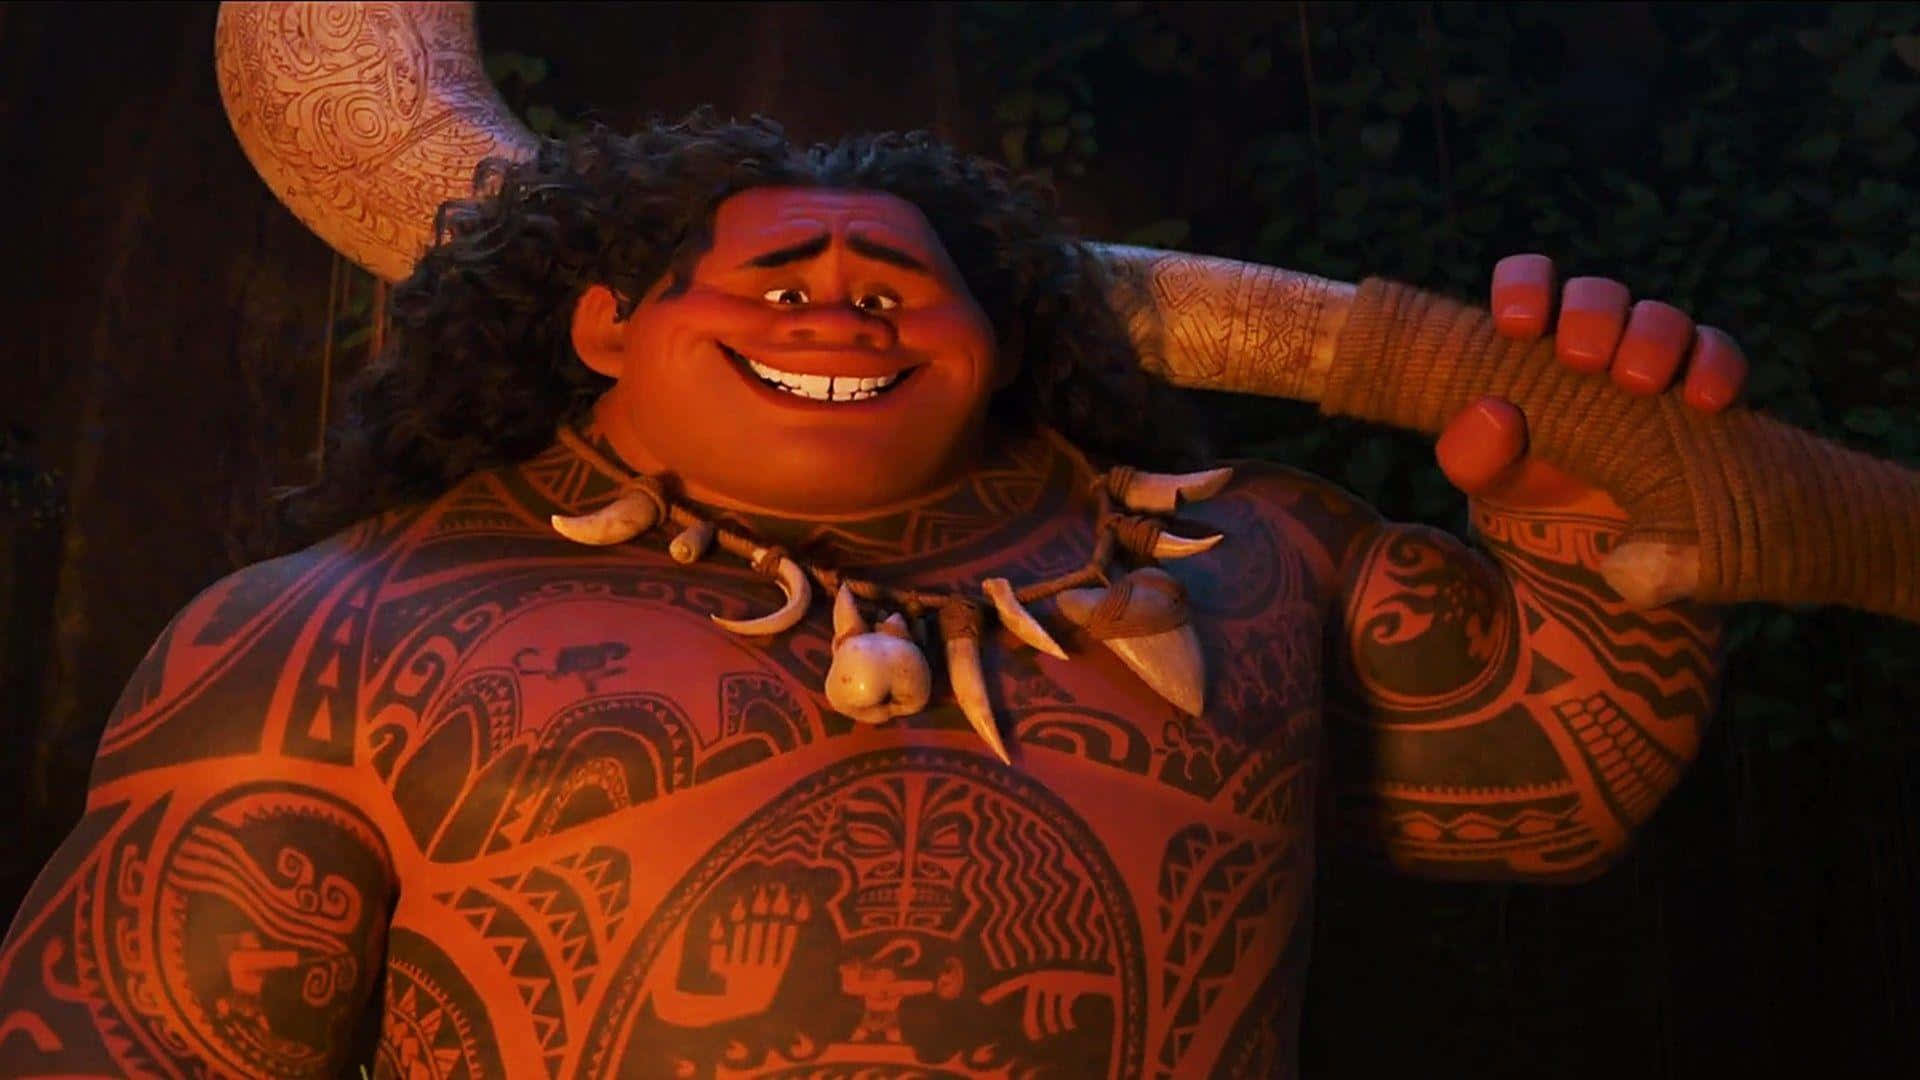 Moana, a heroine no one will soon forget